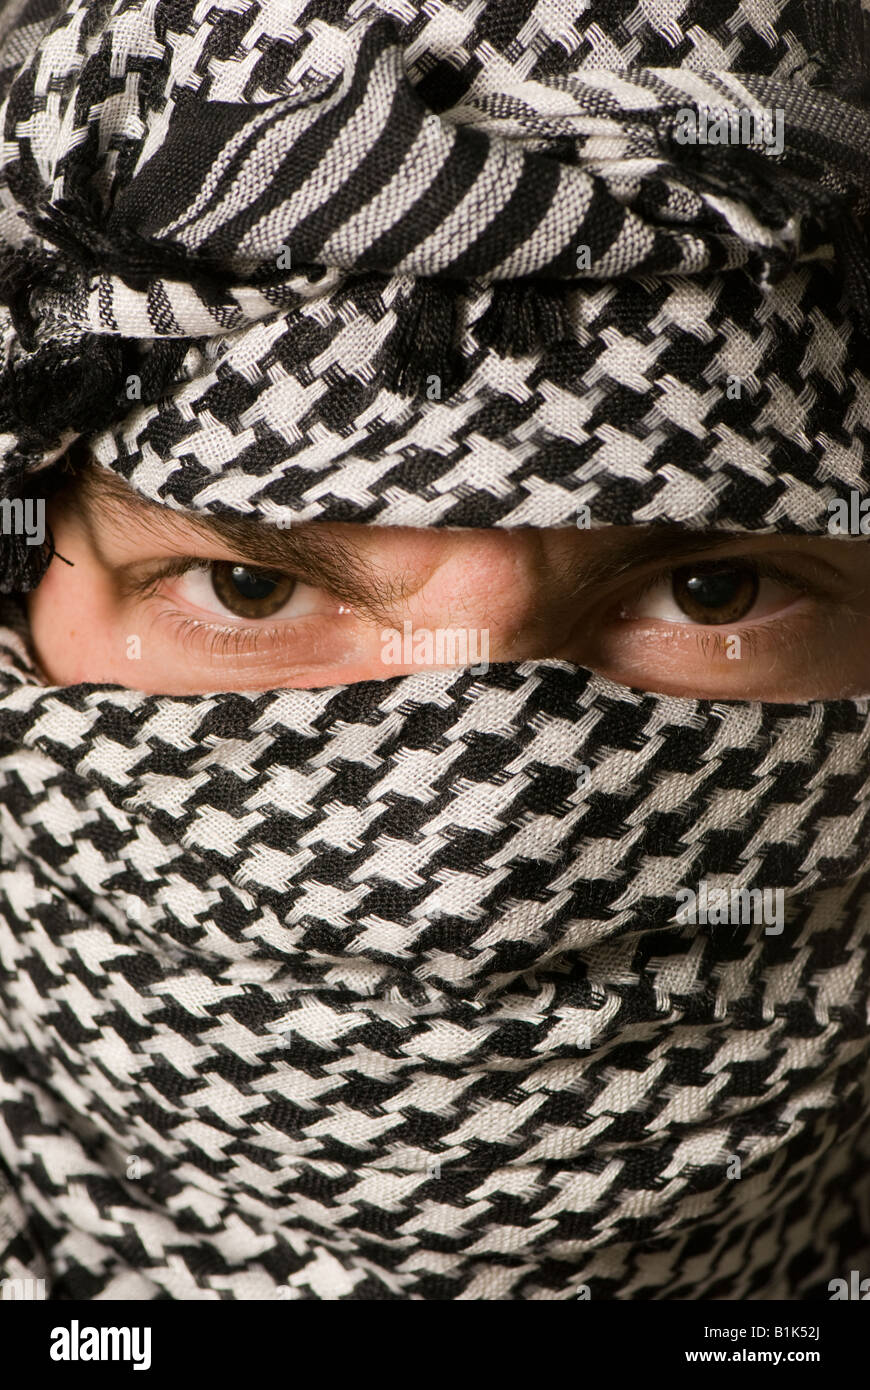 Close up of eyes in Arab shemagh headscarf Stock Photo